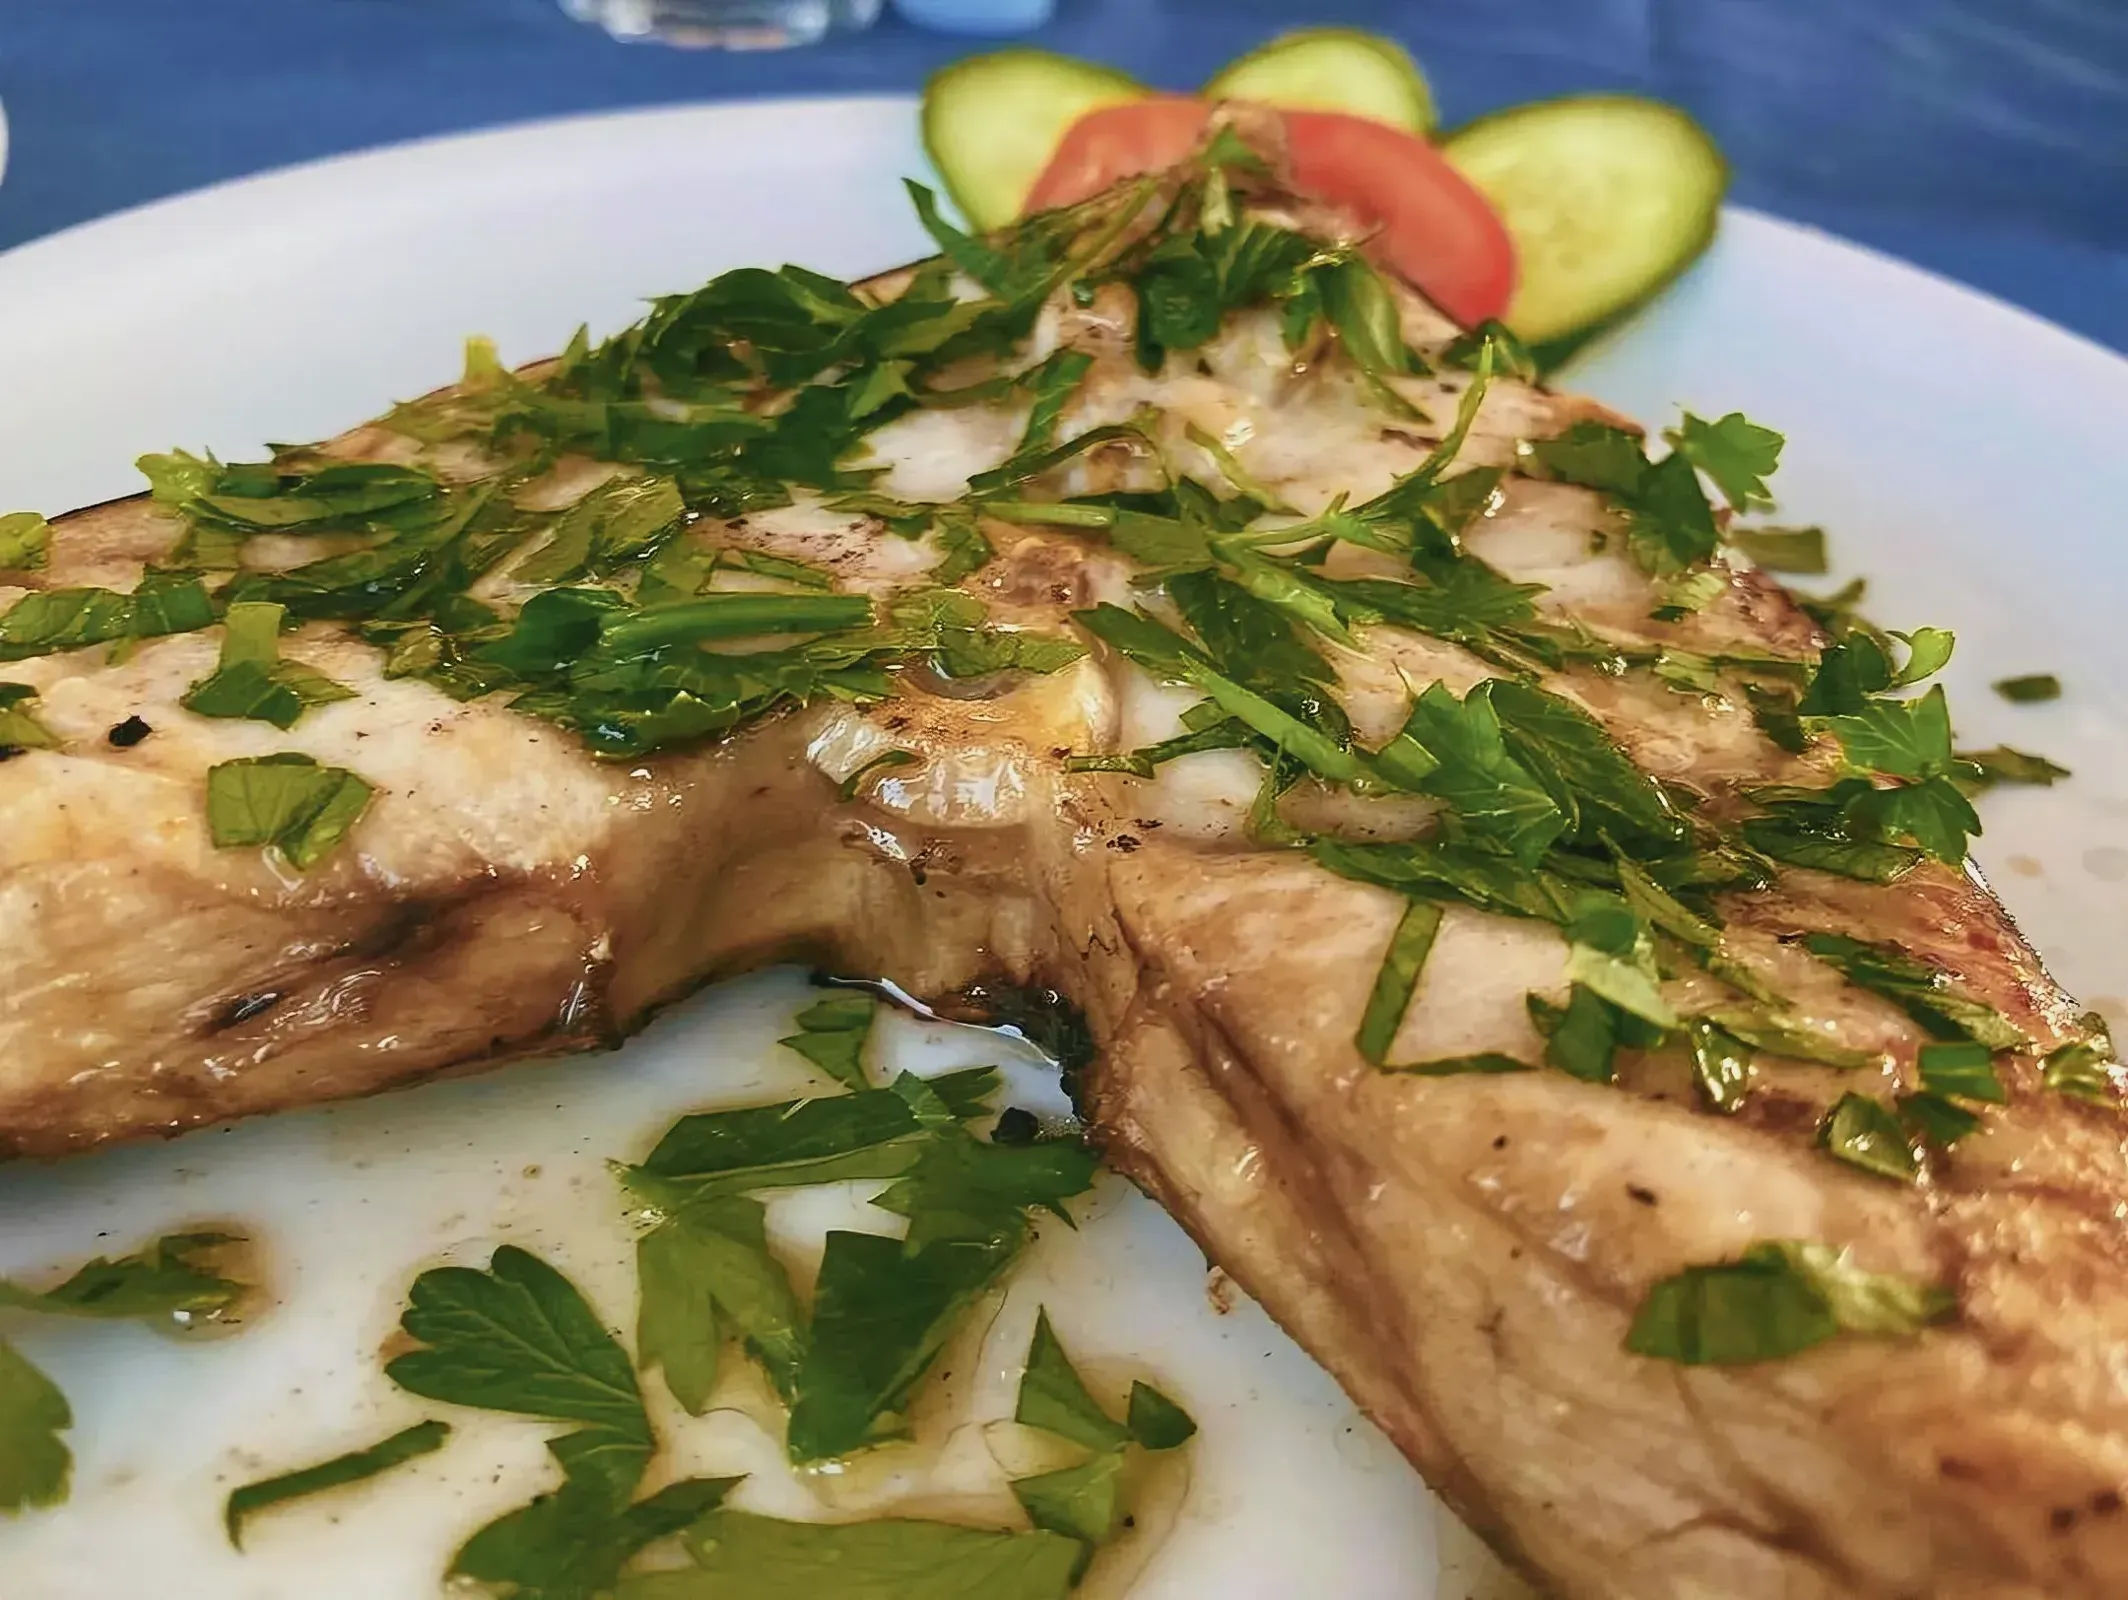 Beautifully garnished piece of fish on a plate with fresh herbs